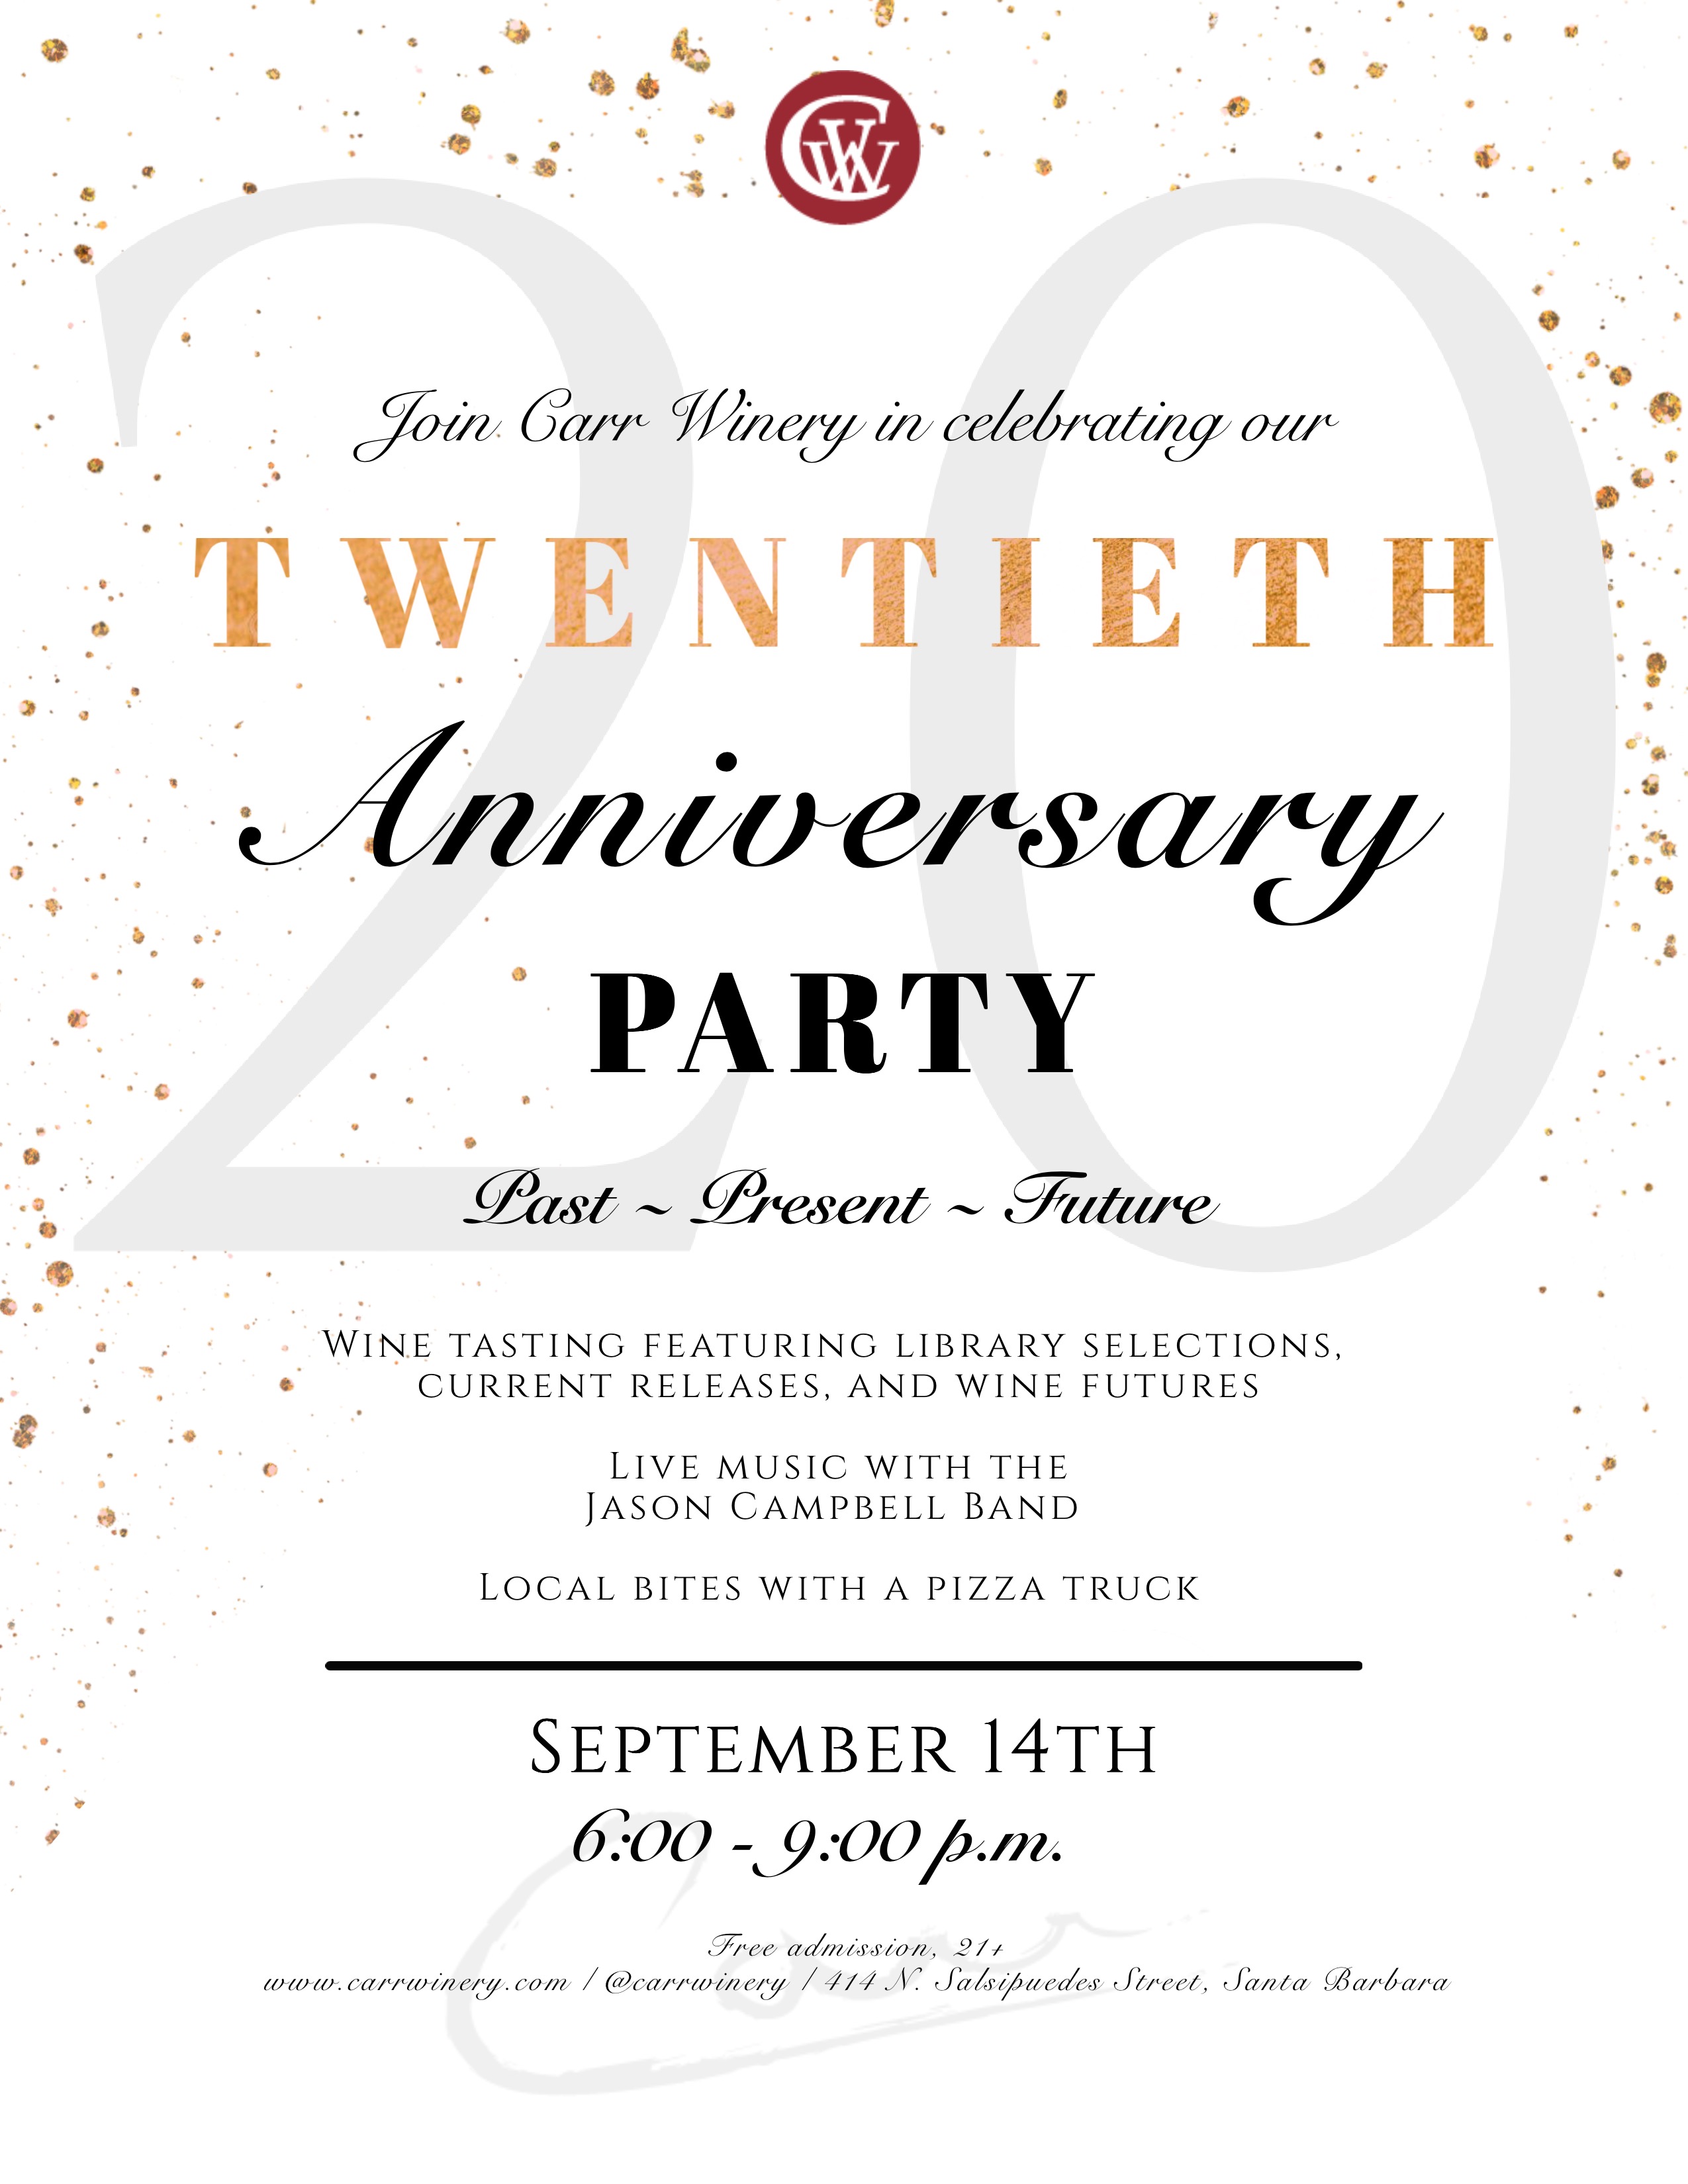 Carr Winery 20th Anniversary Party